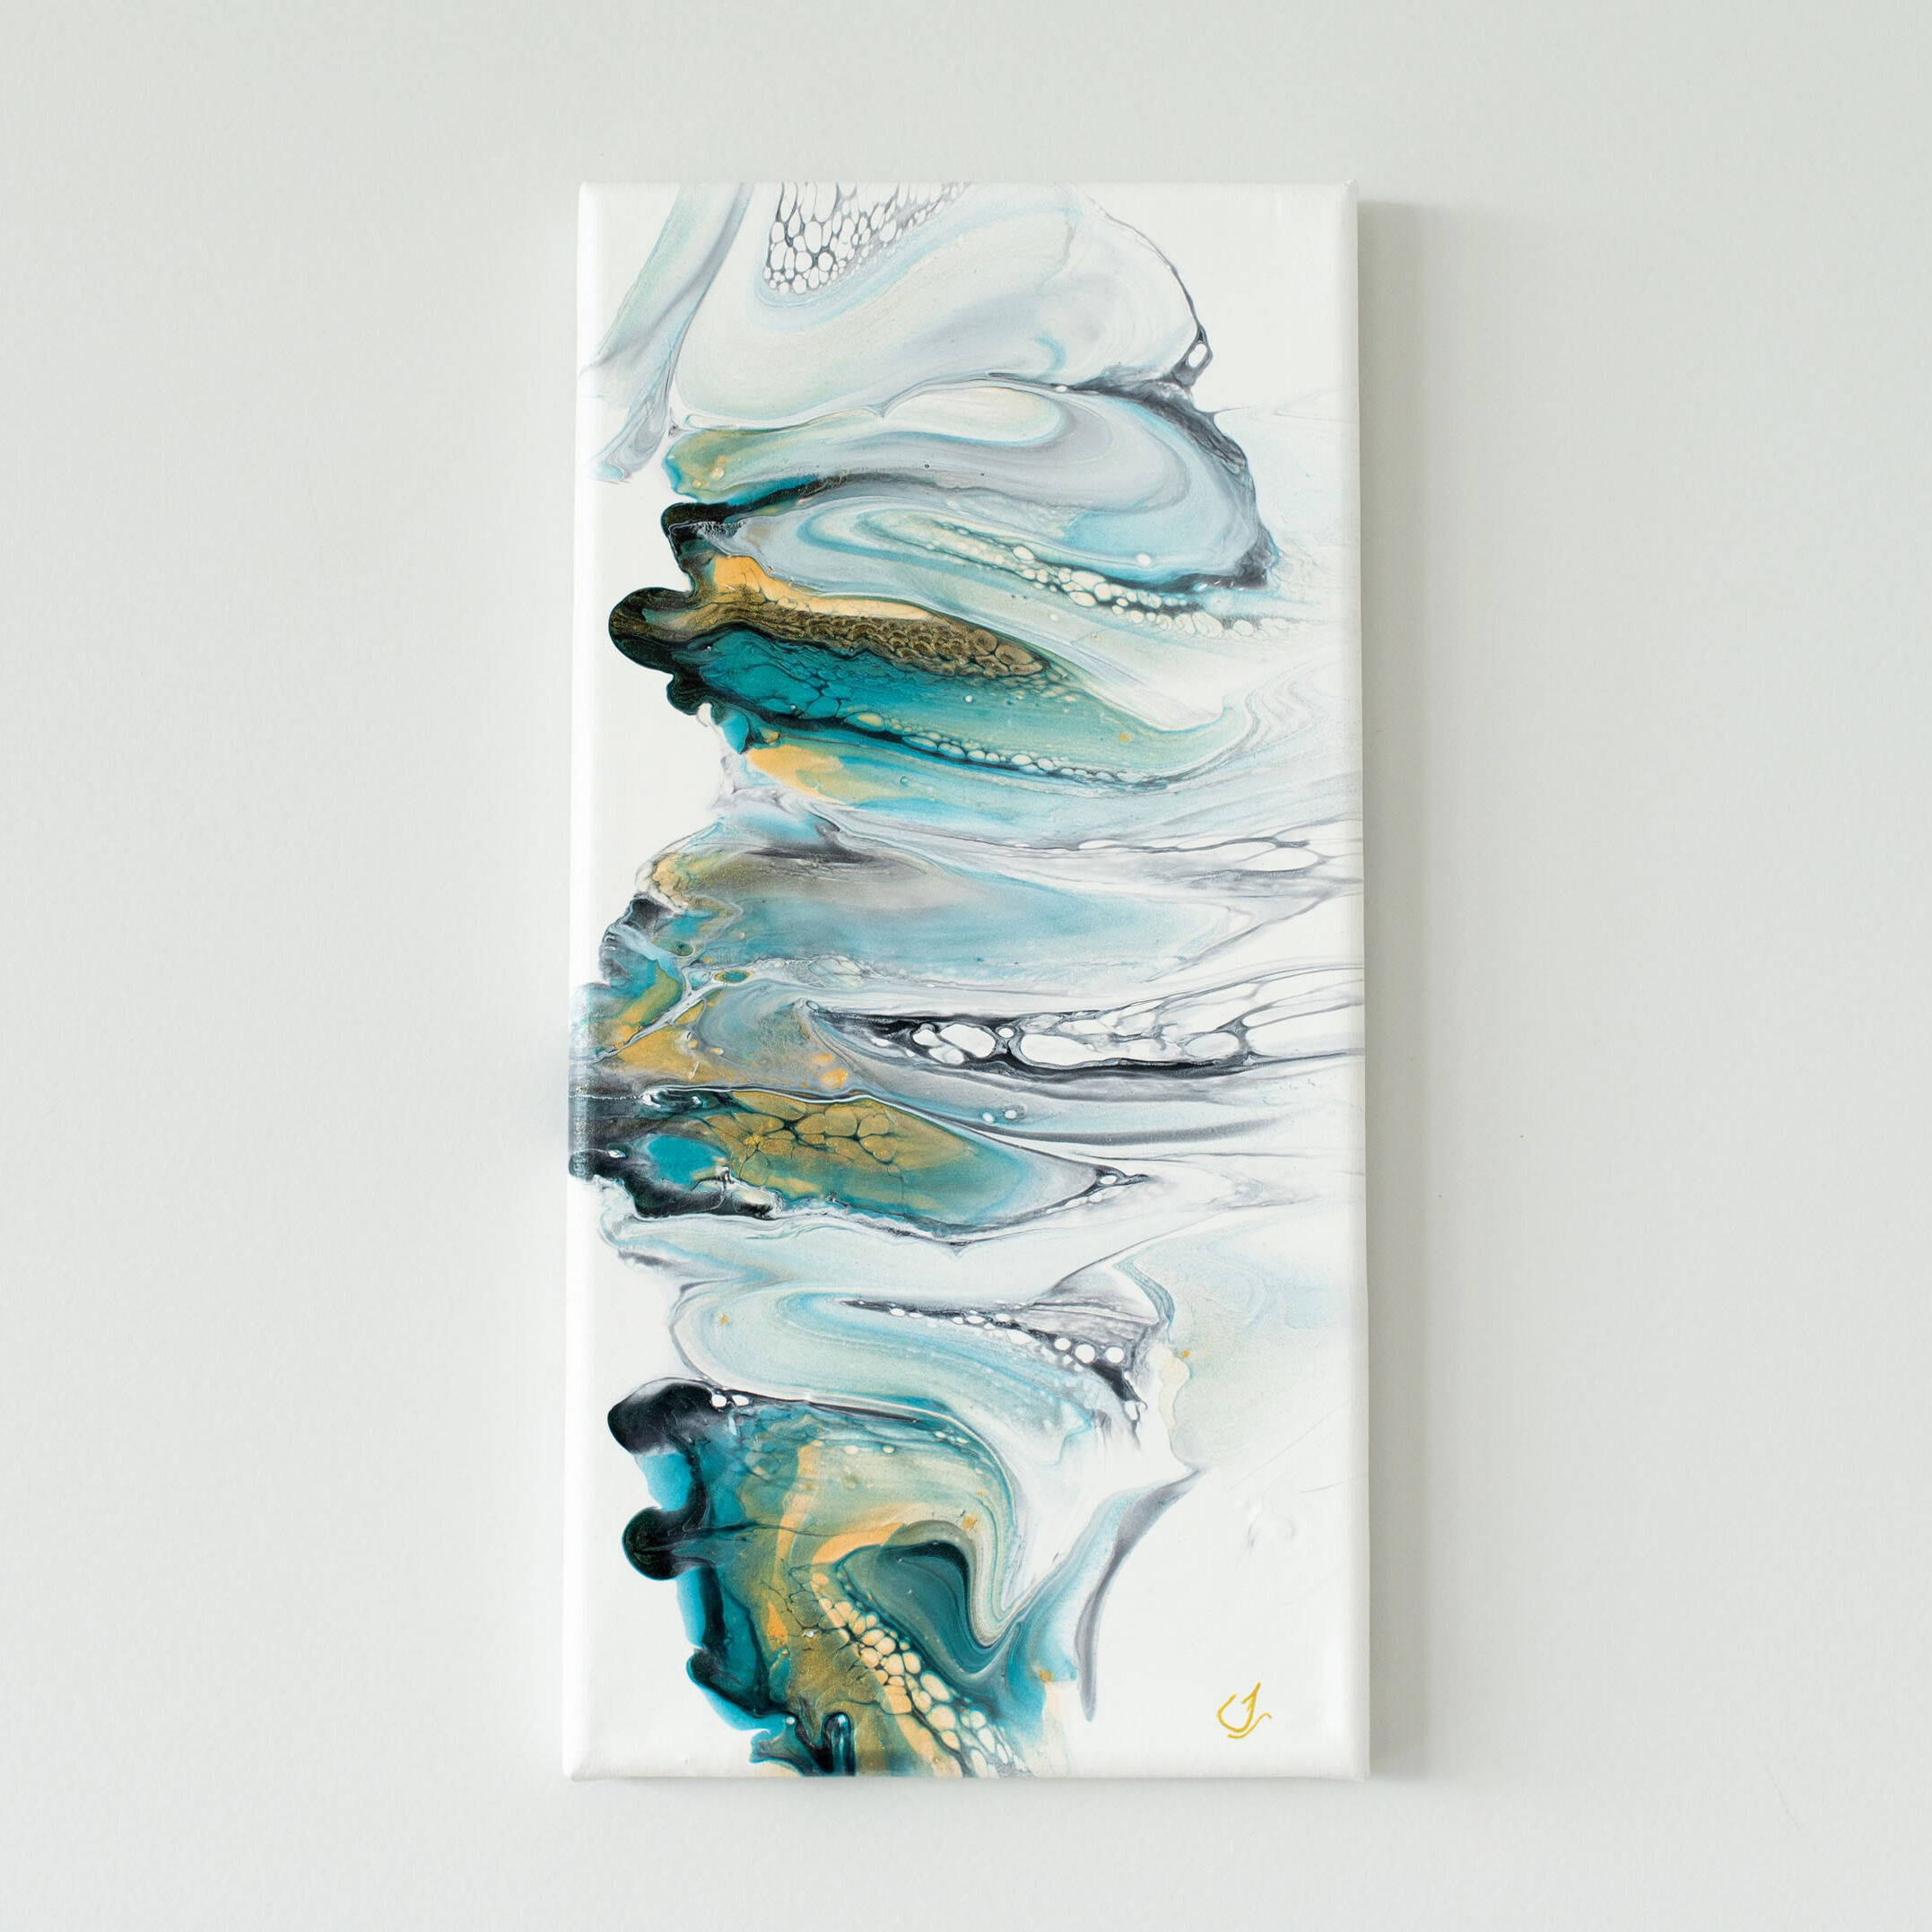 The Glacial Rivers Collection